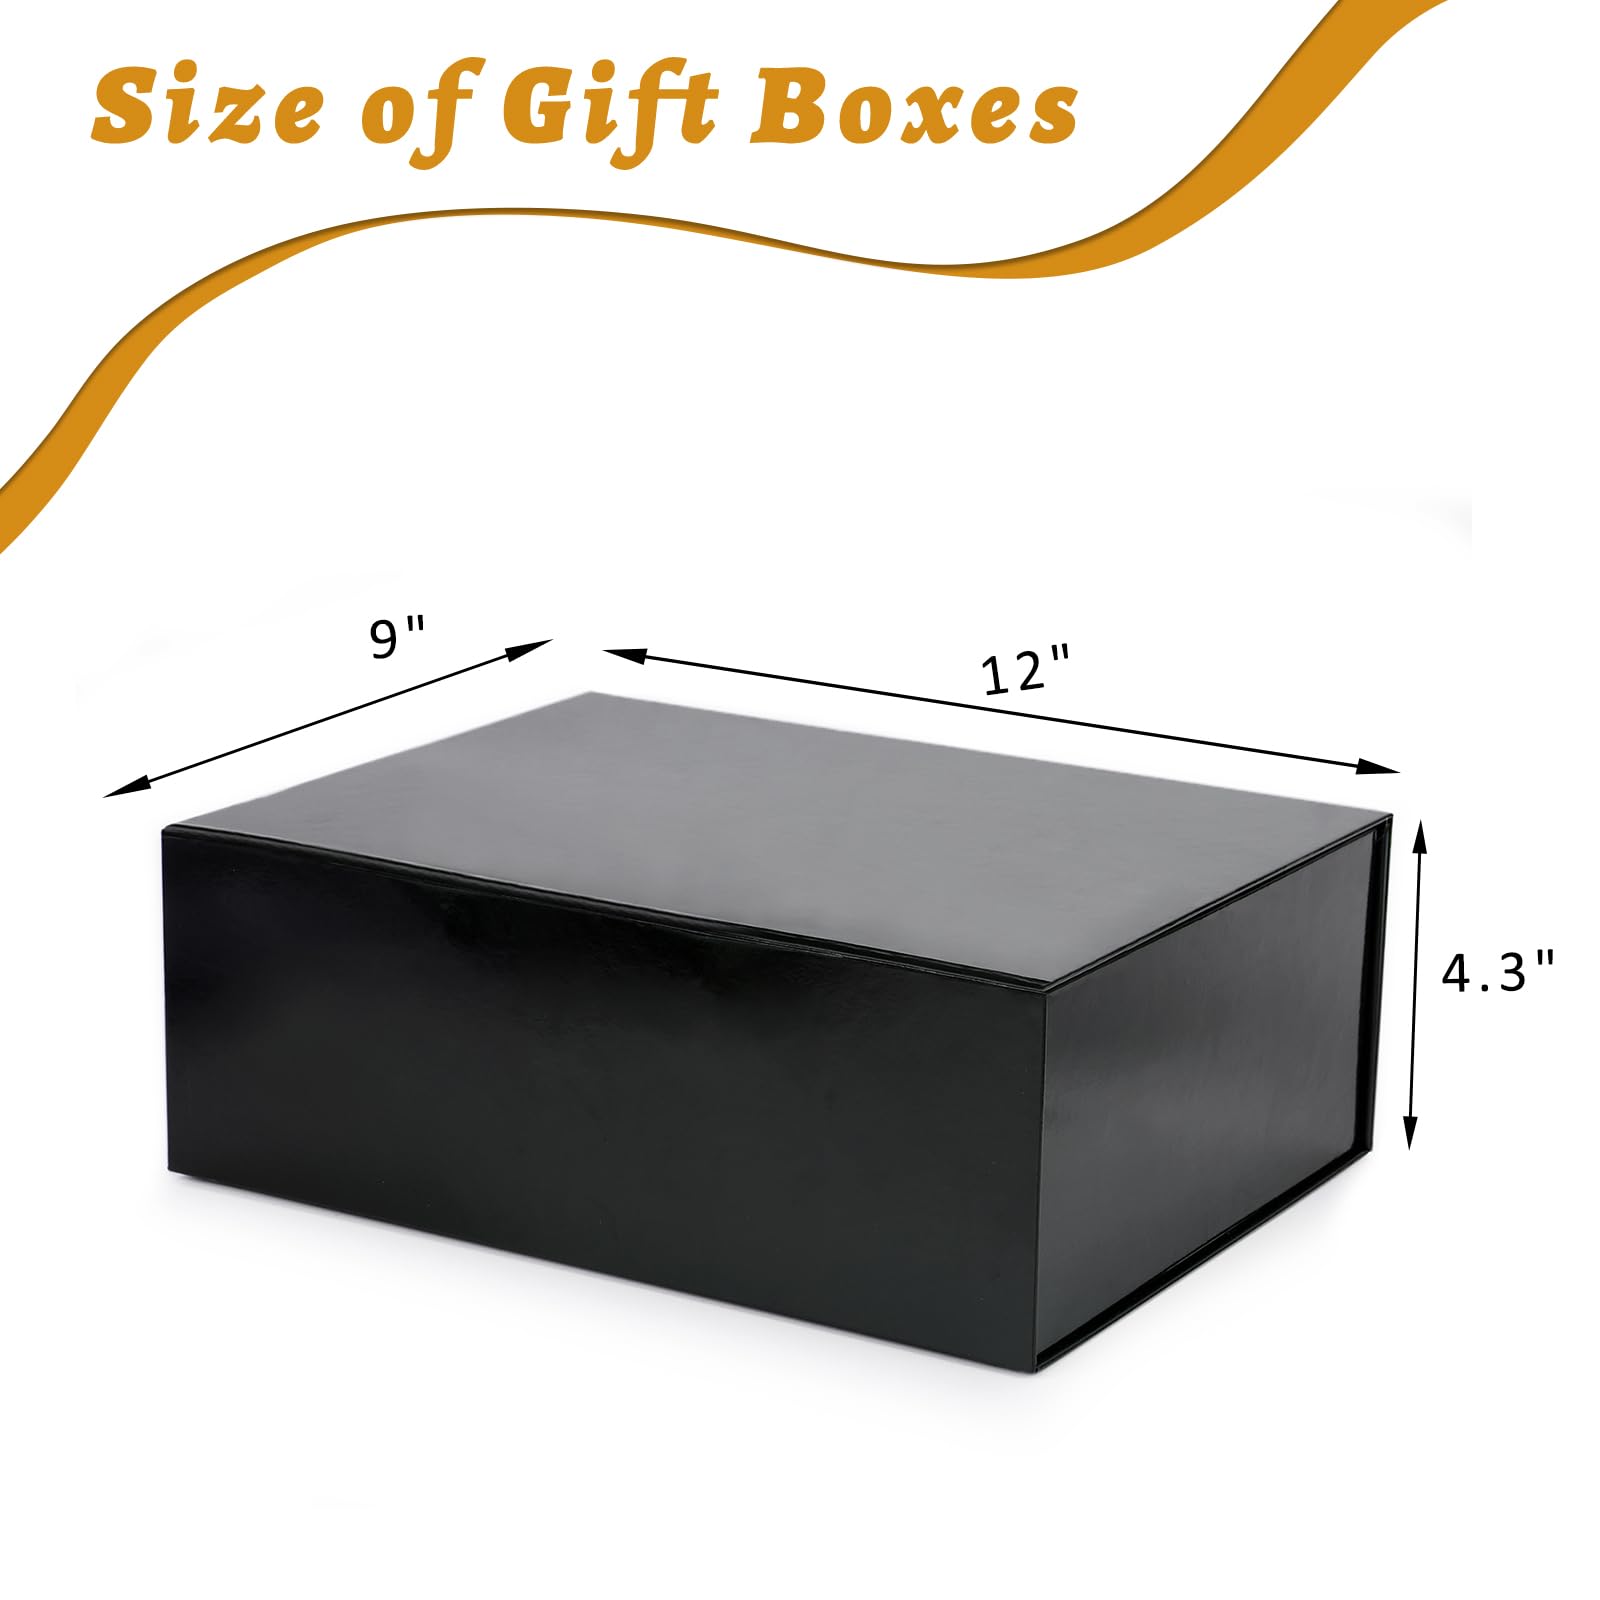 Moretoes Large Black Collapsible Gift Box with Magnetic Closure Lids 12x9x4.3 in, Bridesmaid Groomsman Proposal Boxes, Rectangle Present Box for Graduation Birthday Storage (1 Pack)